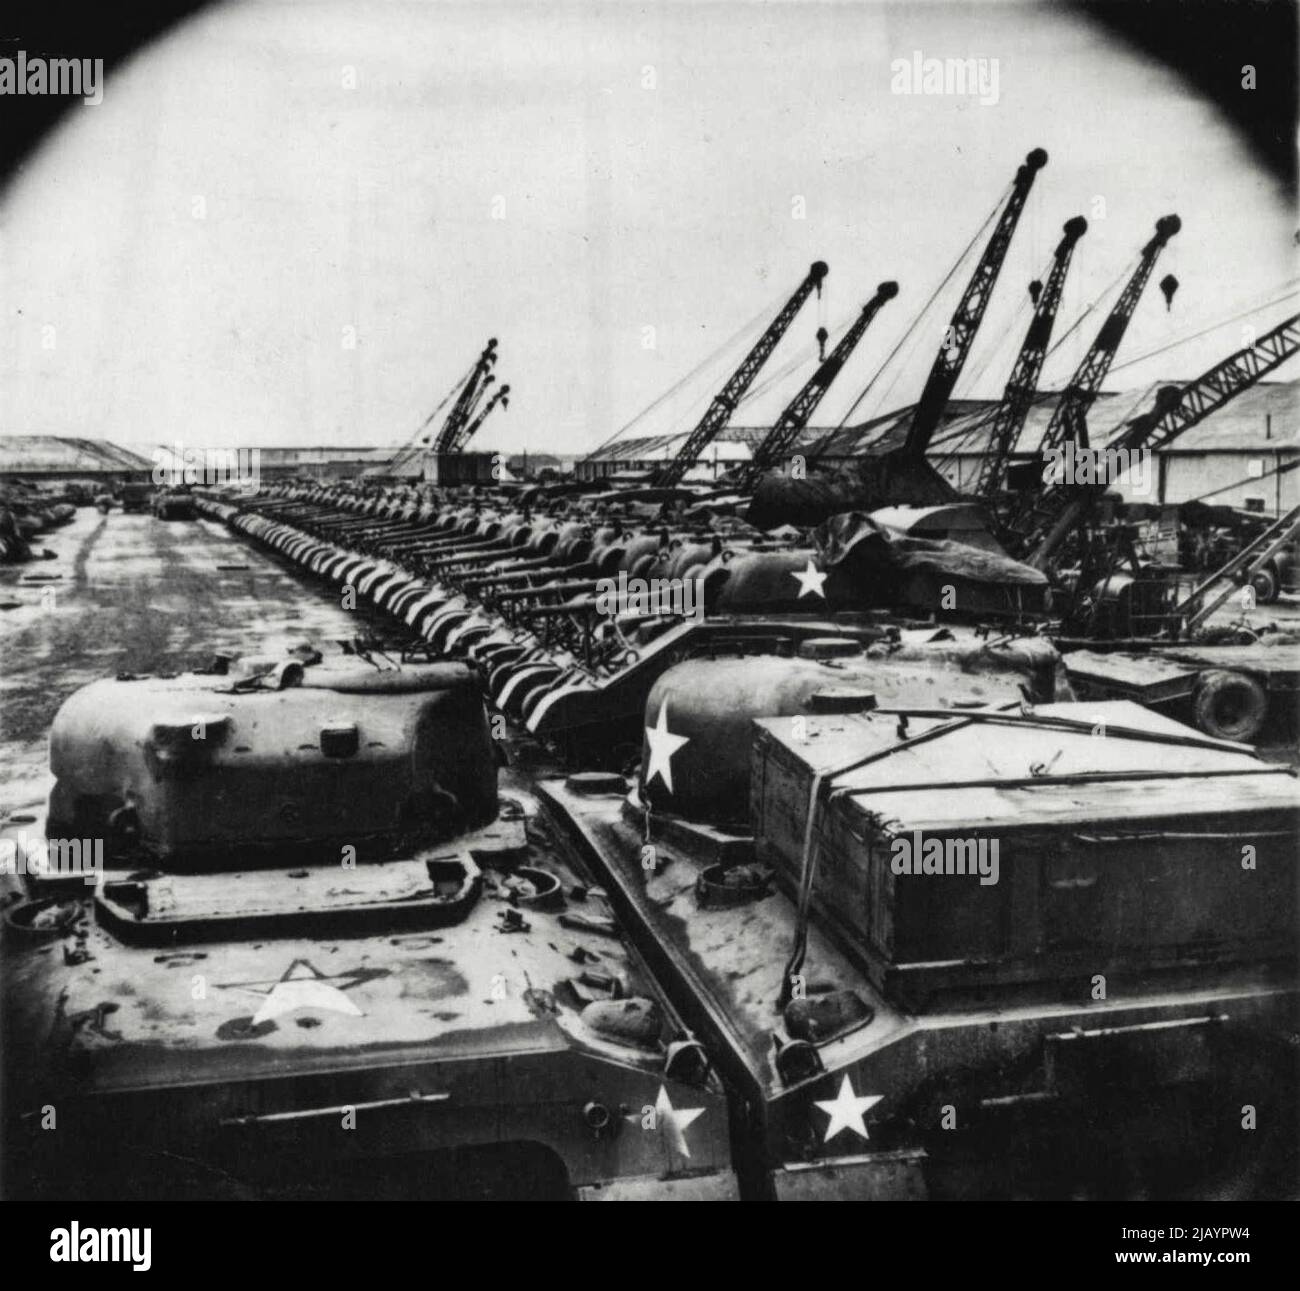 This general view of a tank park in an Ordnance depot in England shows a line of Sherman tanks and tank destroyers, part of the concentrated invasion supply power. February 26, 1944. (Photo by Associated Press Photo). Stock Photo